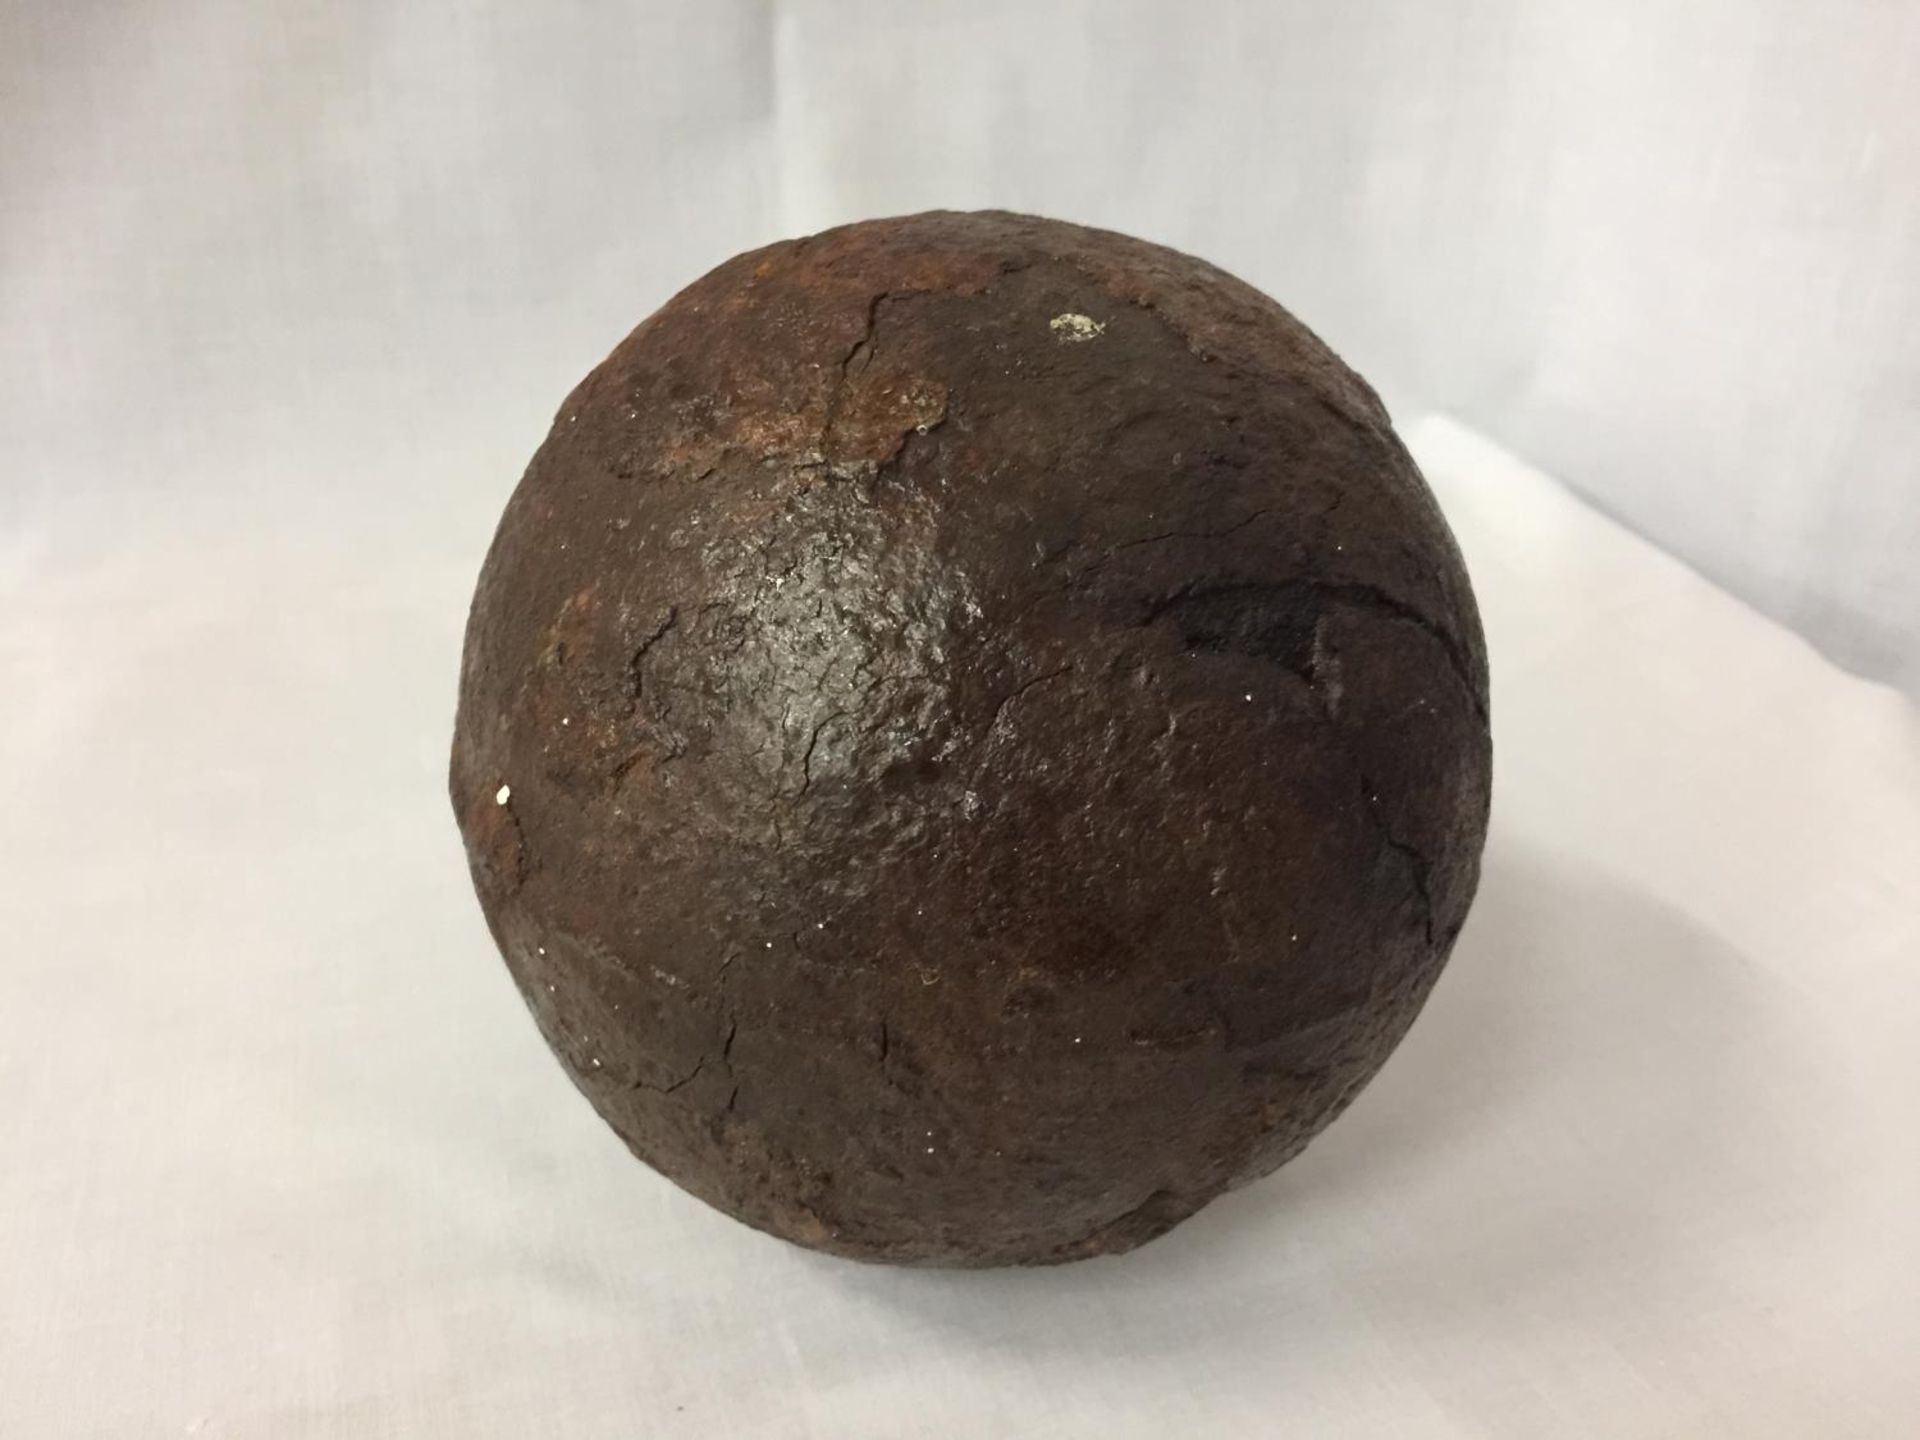 A LARGE CANNON BALL FROM H.M.S. ASSOCIATION WHICH SANK IN 1707